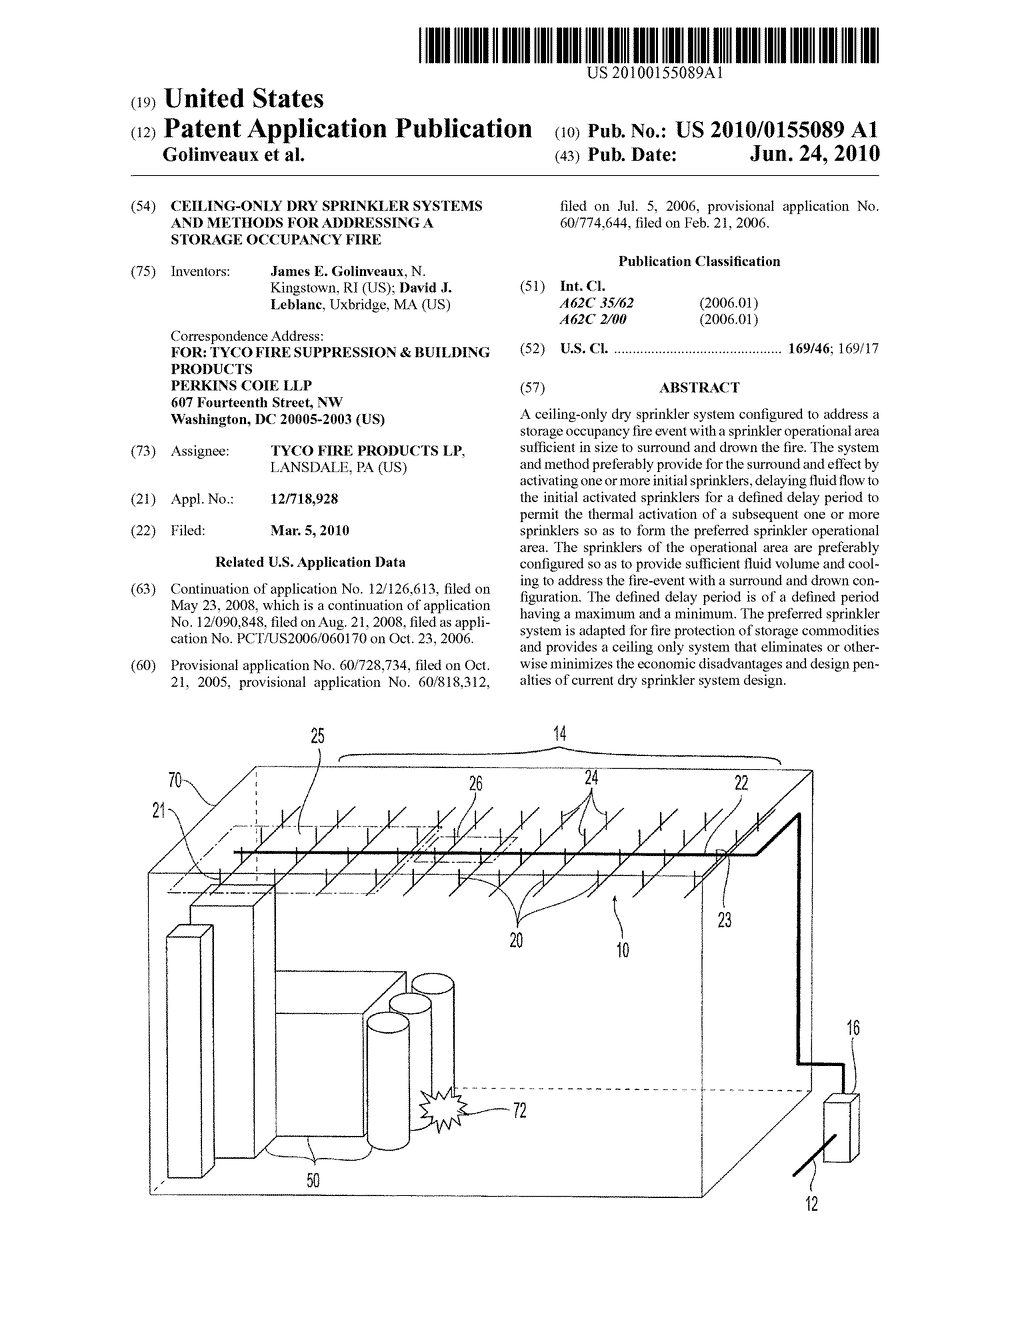 CEILING-ONLY DRY SPRINKLER SYSTEMS AND METHODS FOR ADDRESSING A STORAGE OCCUPANCY FIRE - diagram, schematic, and image 01